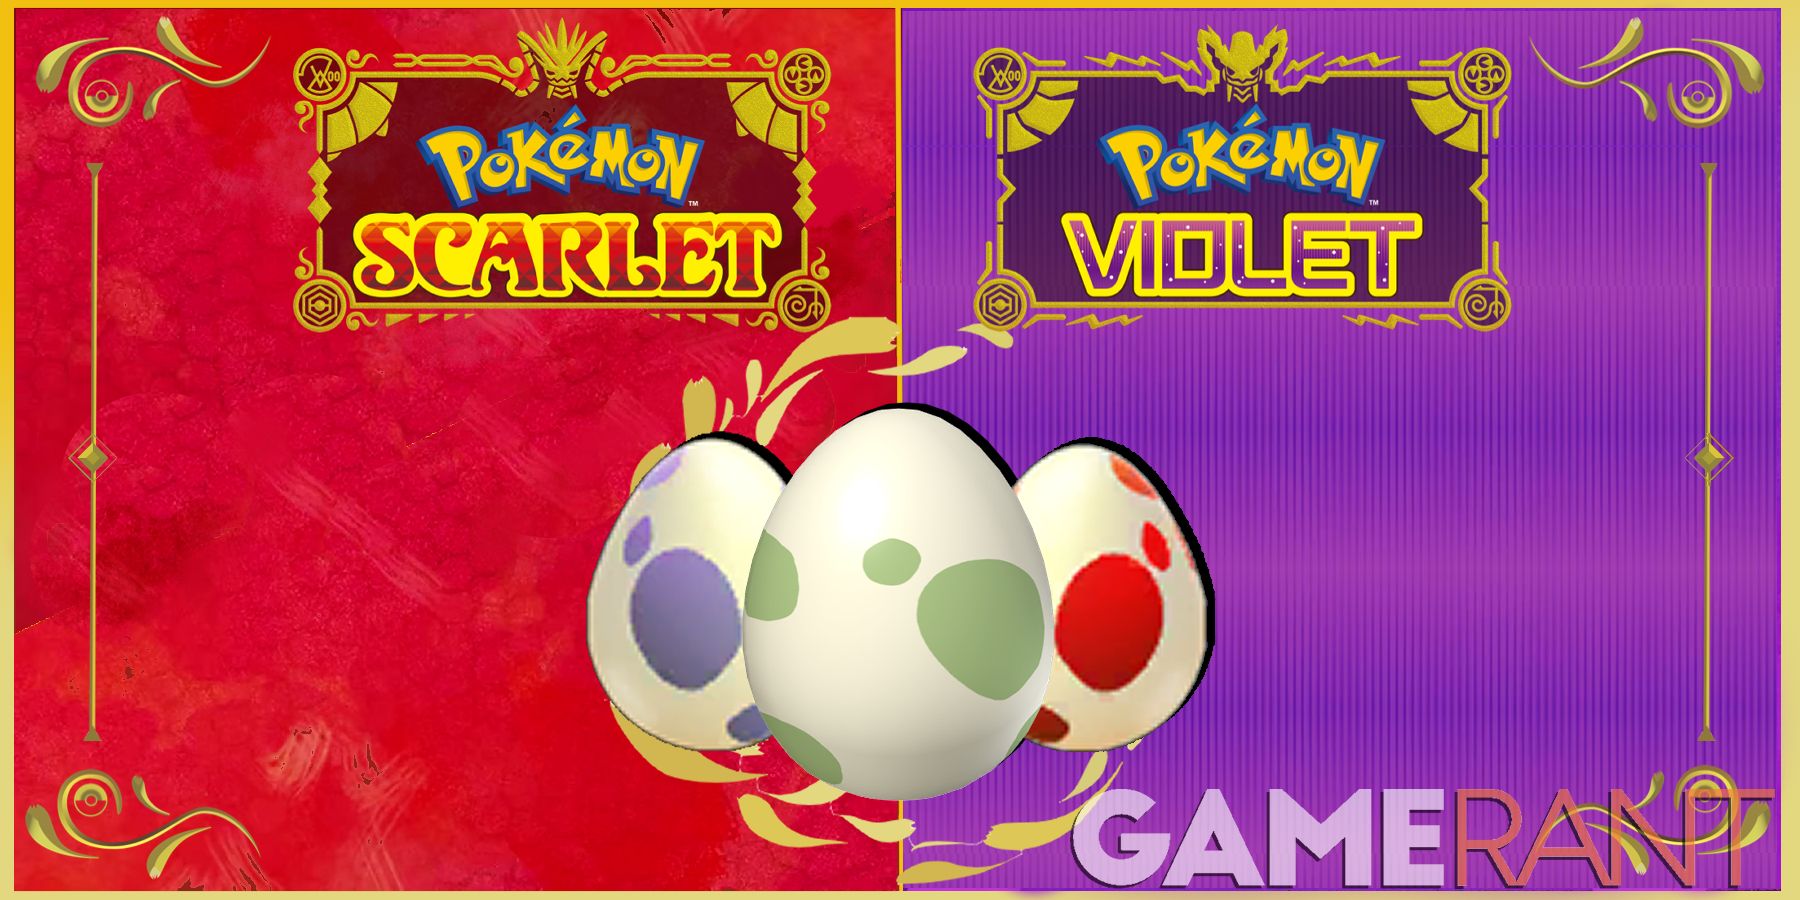 Pokémon Scarlet & Violet: How Long Does It Take To Beat?